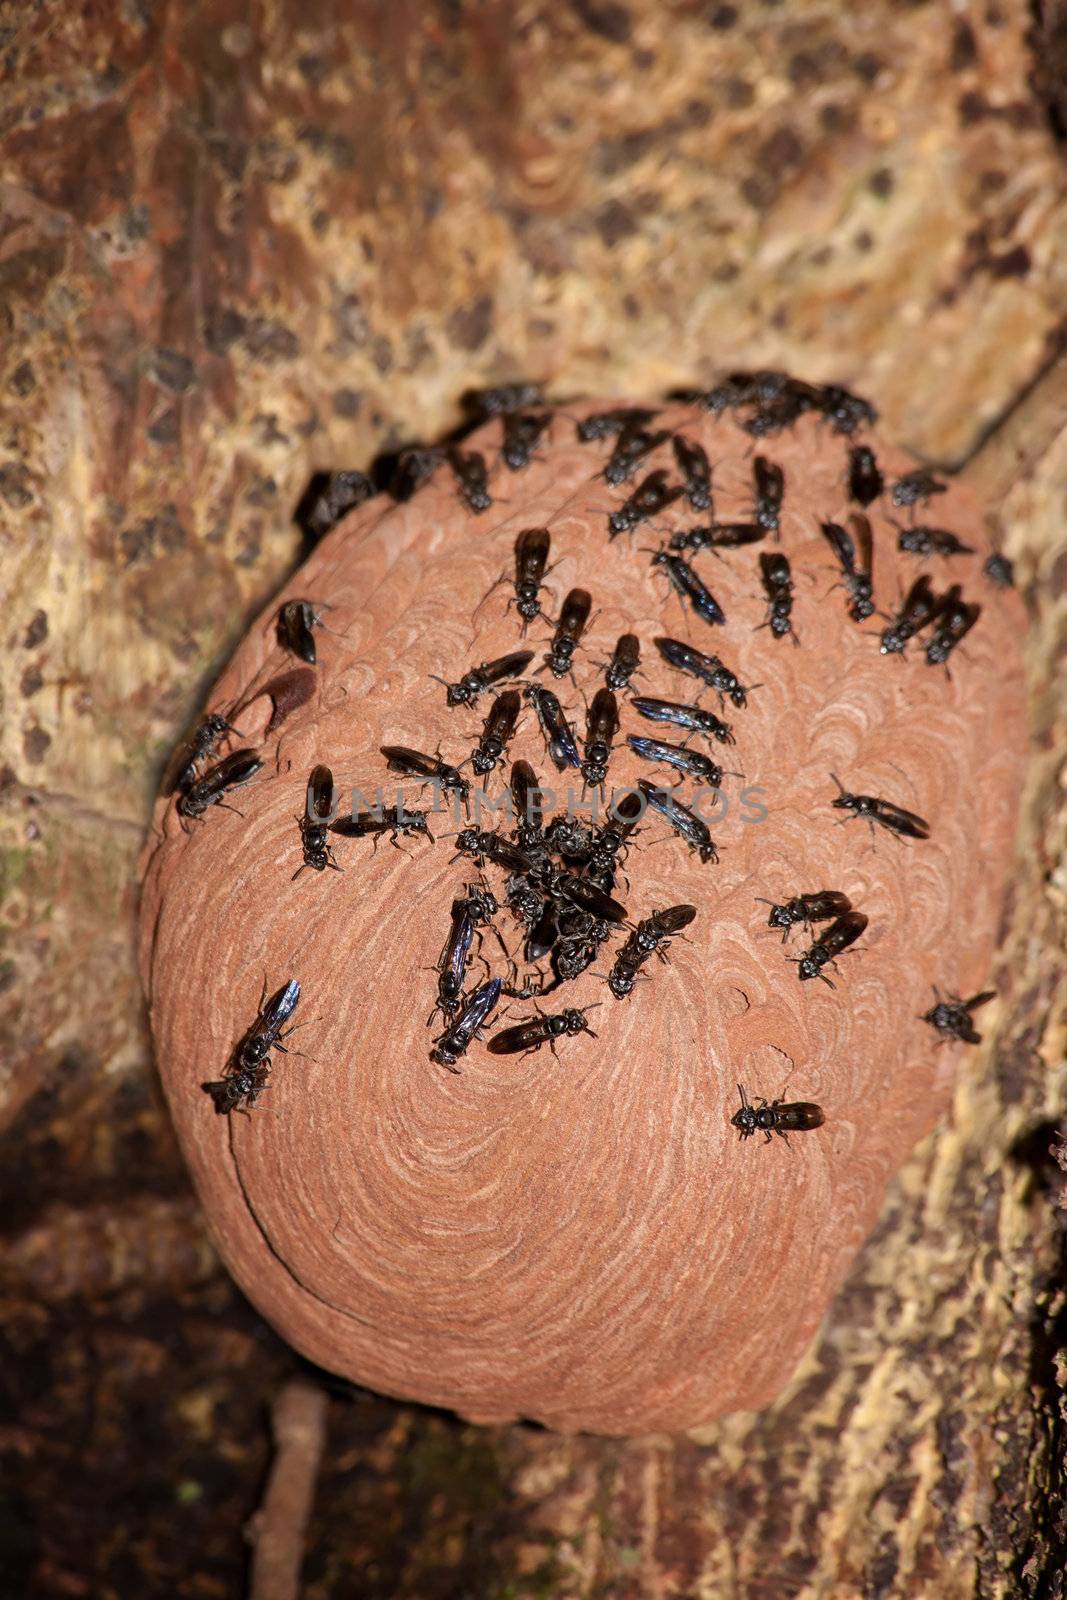 Paper wasps with nest in strangler fig tree in Costa Rica